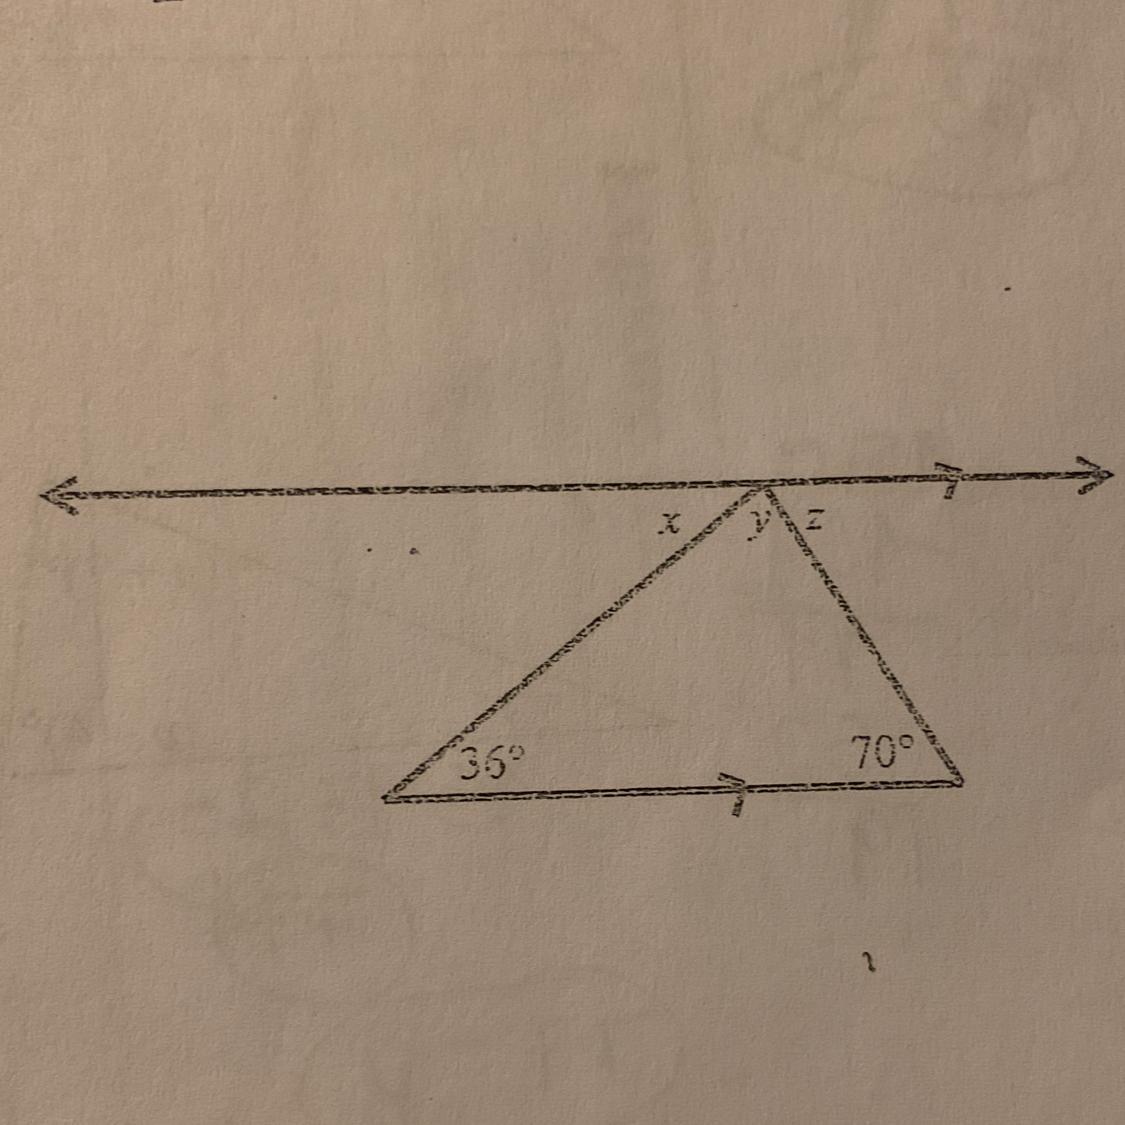 PLEASE HELP ASAP I WILL GIVE BRAINLIEST TO FIRST CORRECT ANSWERFind The Values Of X, Y And Z.